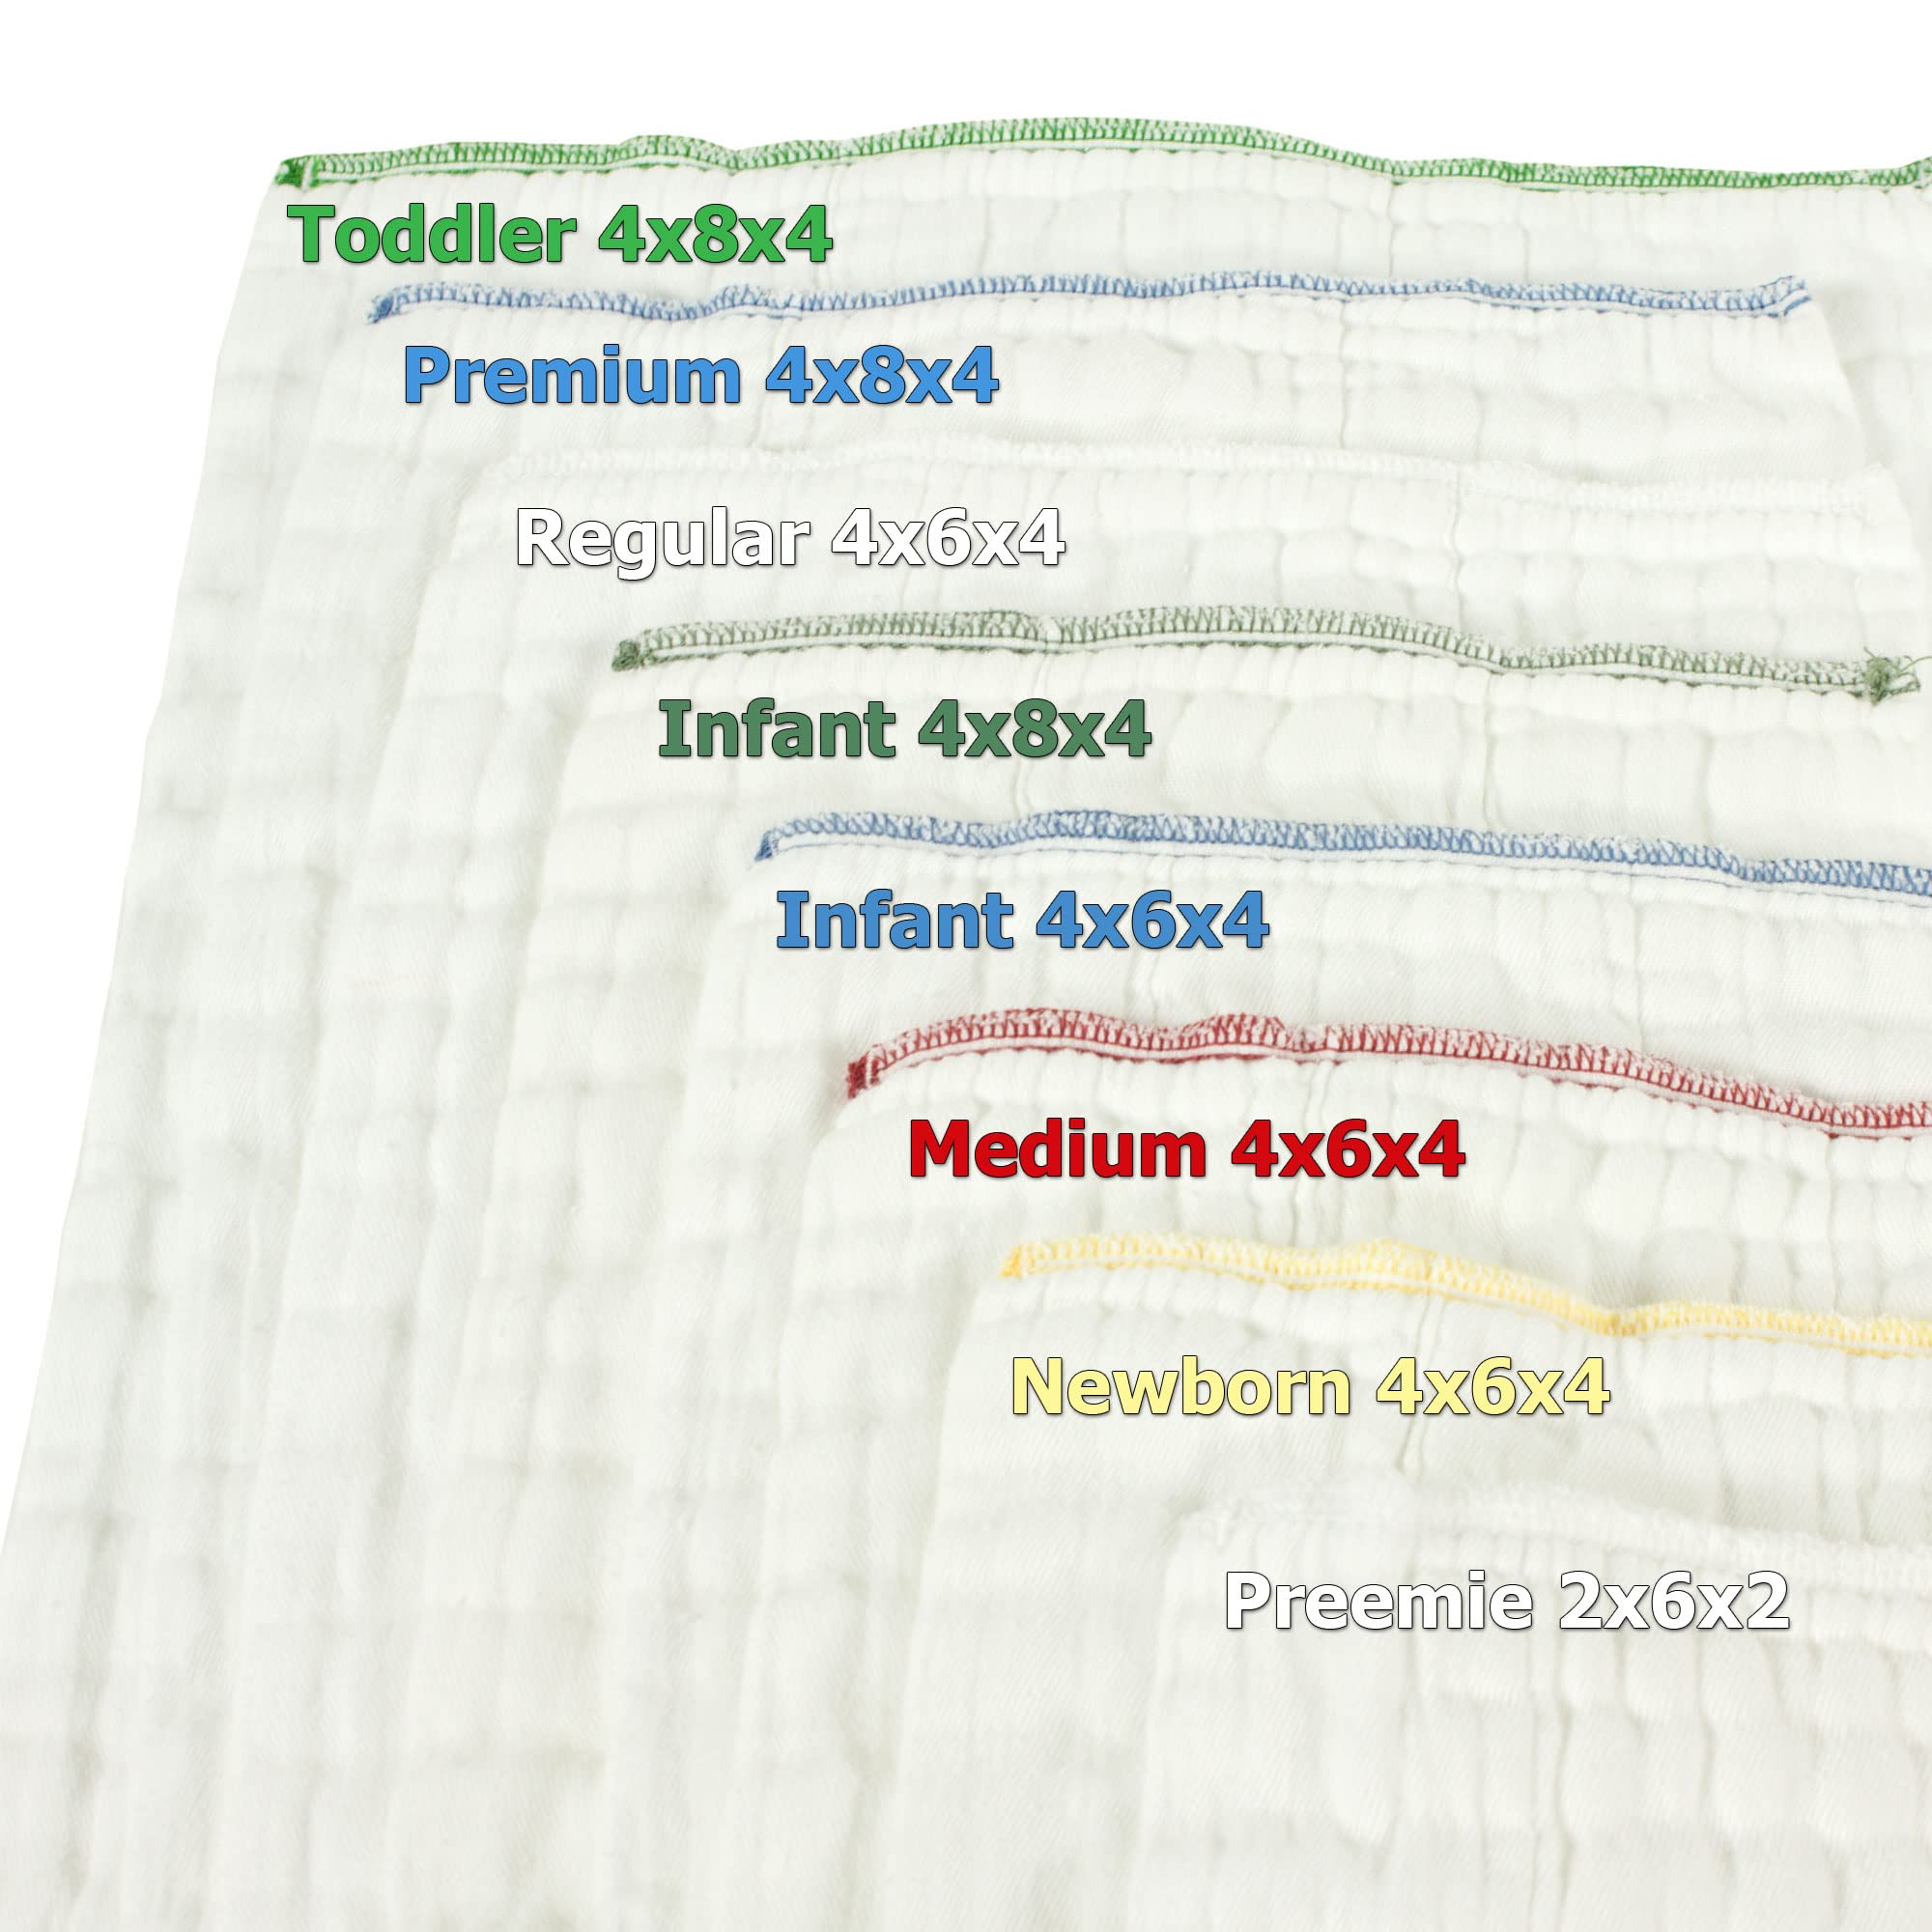 OsoCozy - Indian Cotton Prefolds (Dozen) - Soft and Absorbent Baby Diapers Made of 100% Indian Cotton - 14.5